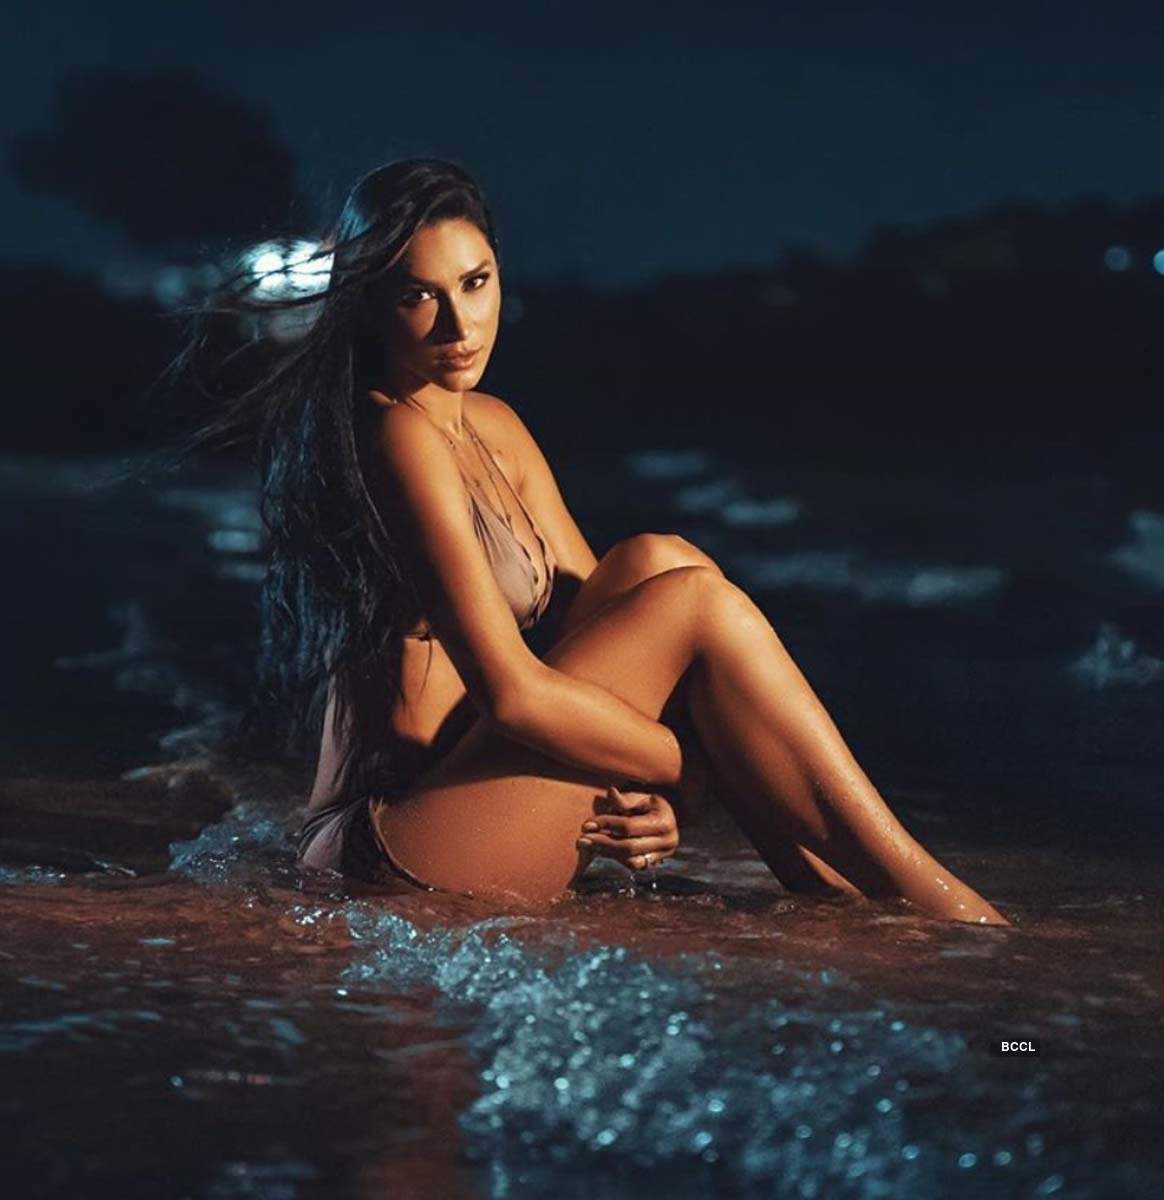 Stunning pictures of Brazilian volleyball star Jaqueline Carvalho